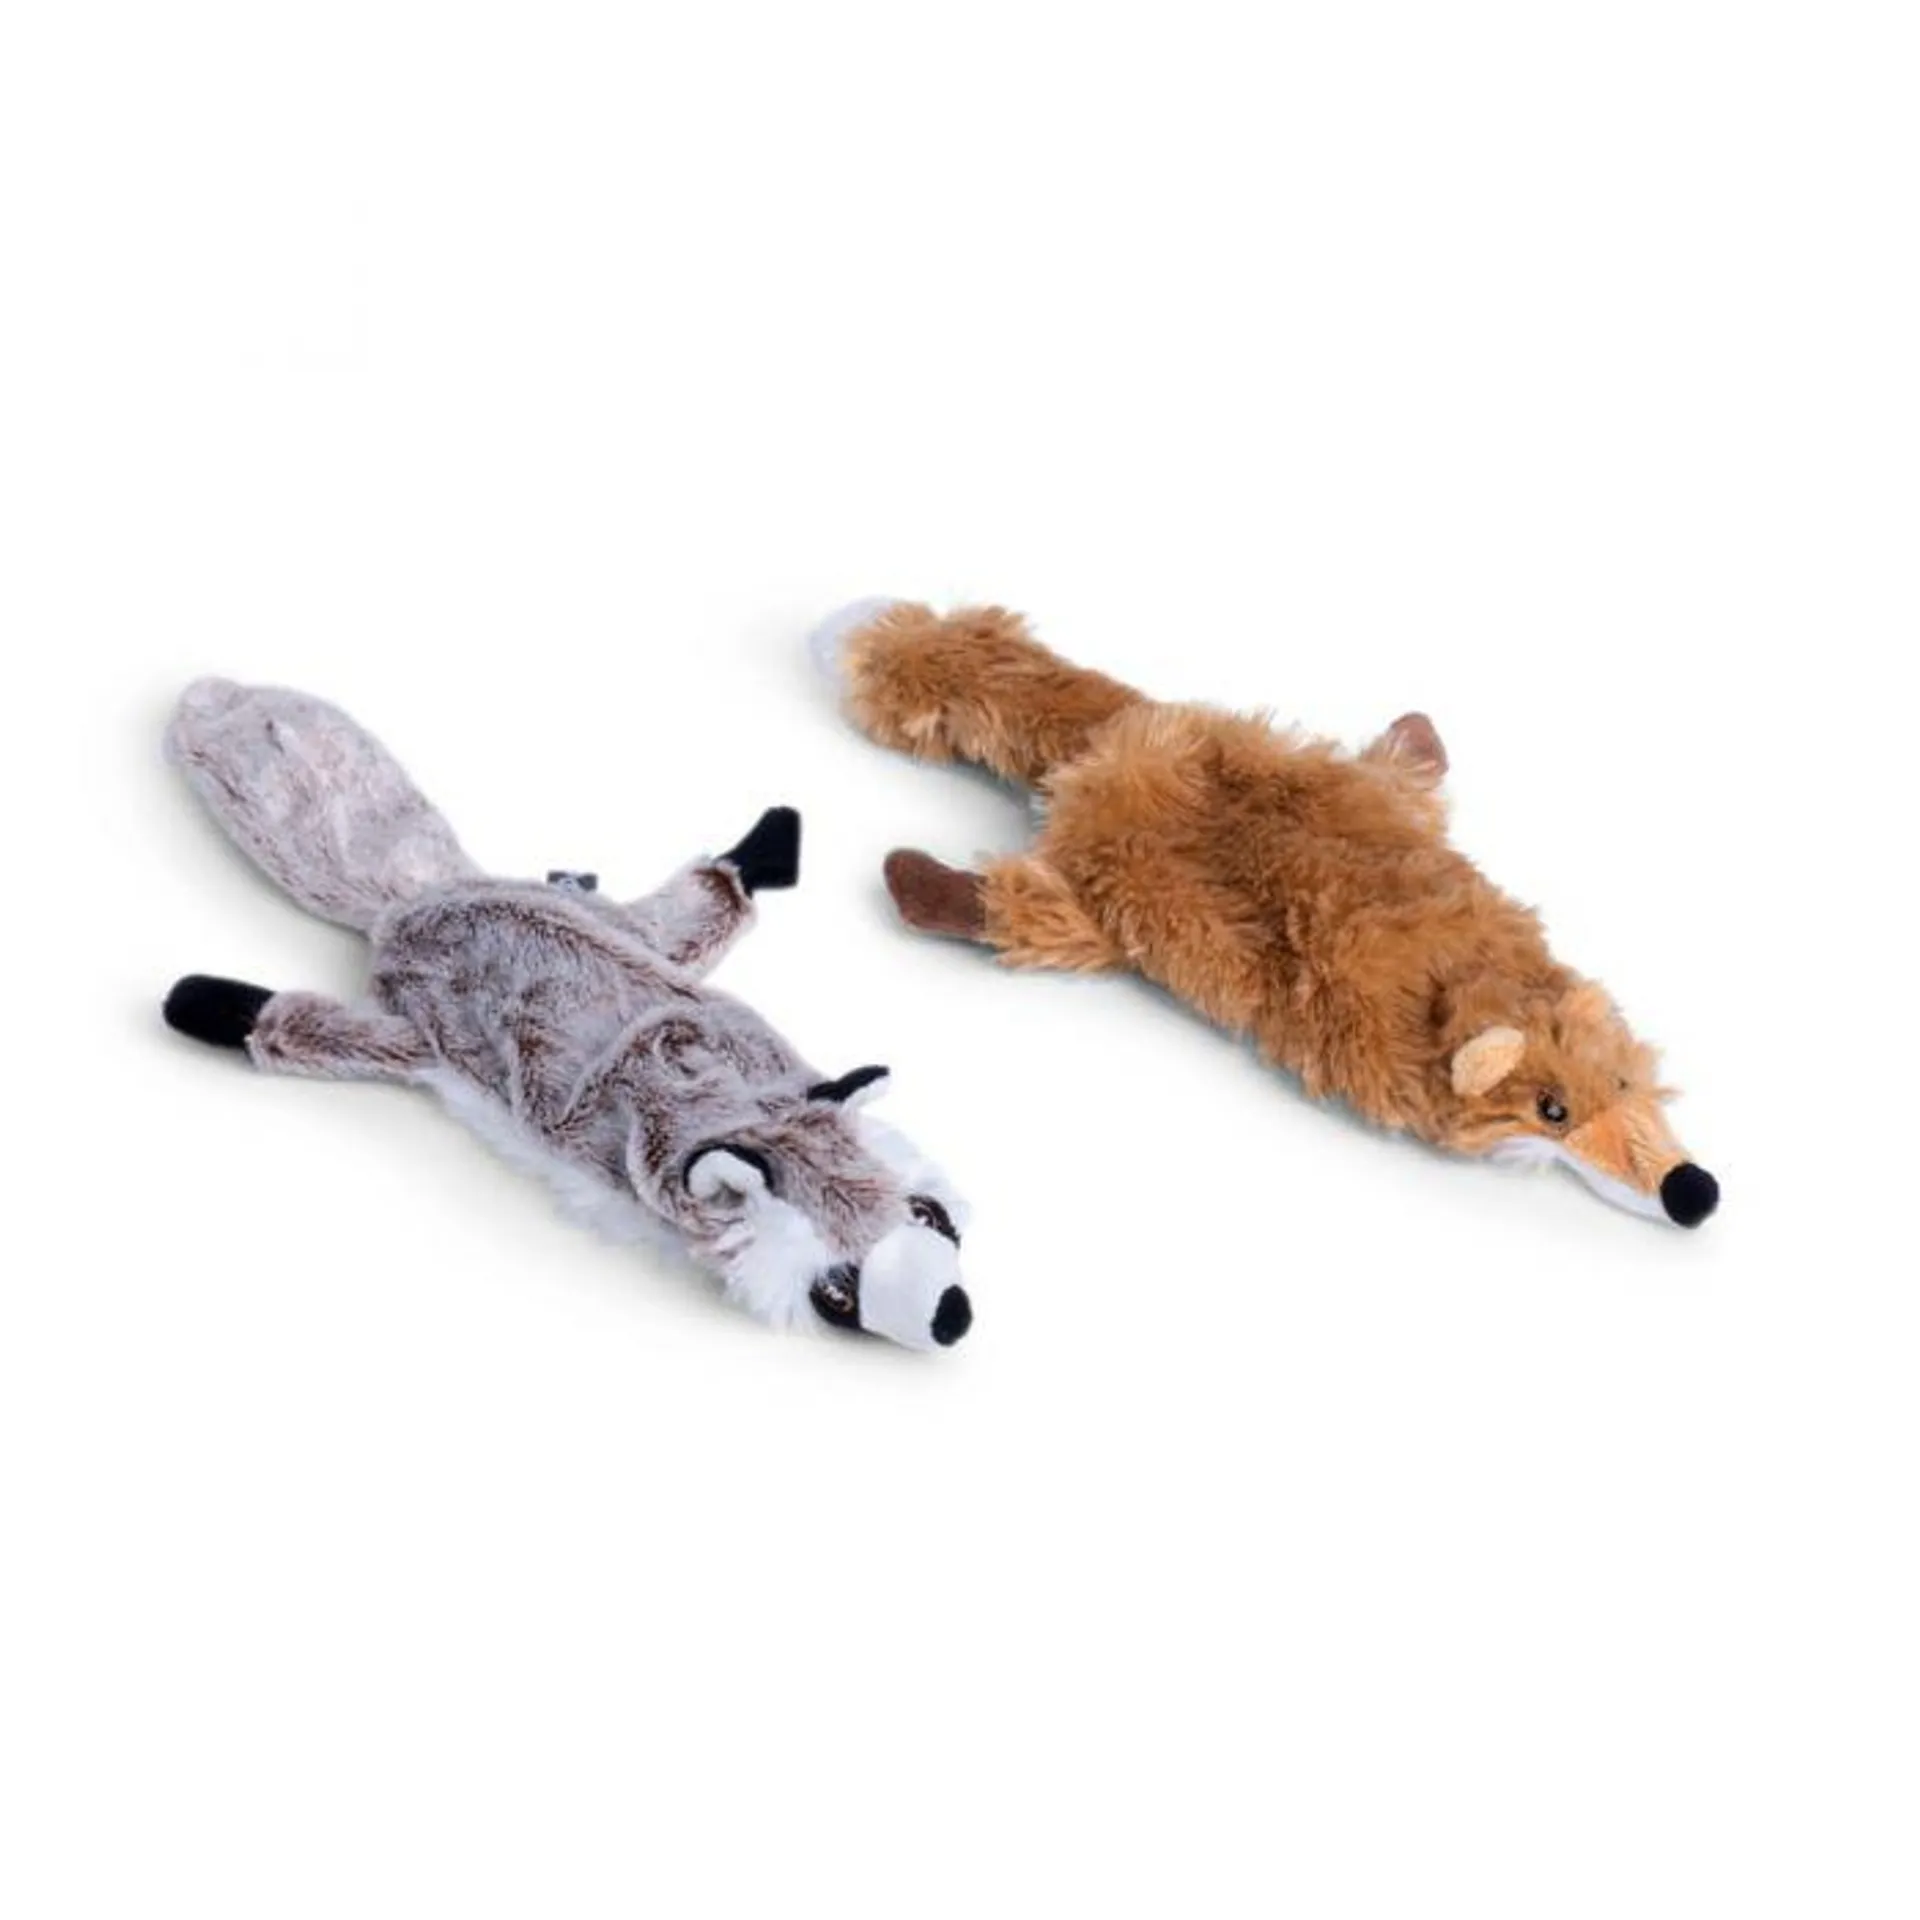 Petface Woodland Critters (Large)